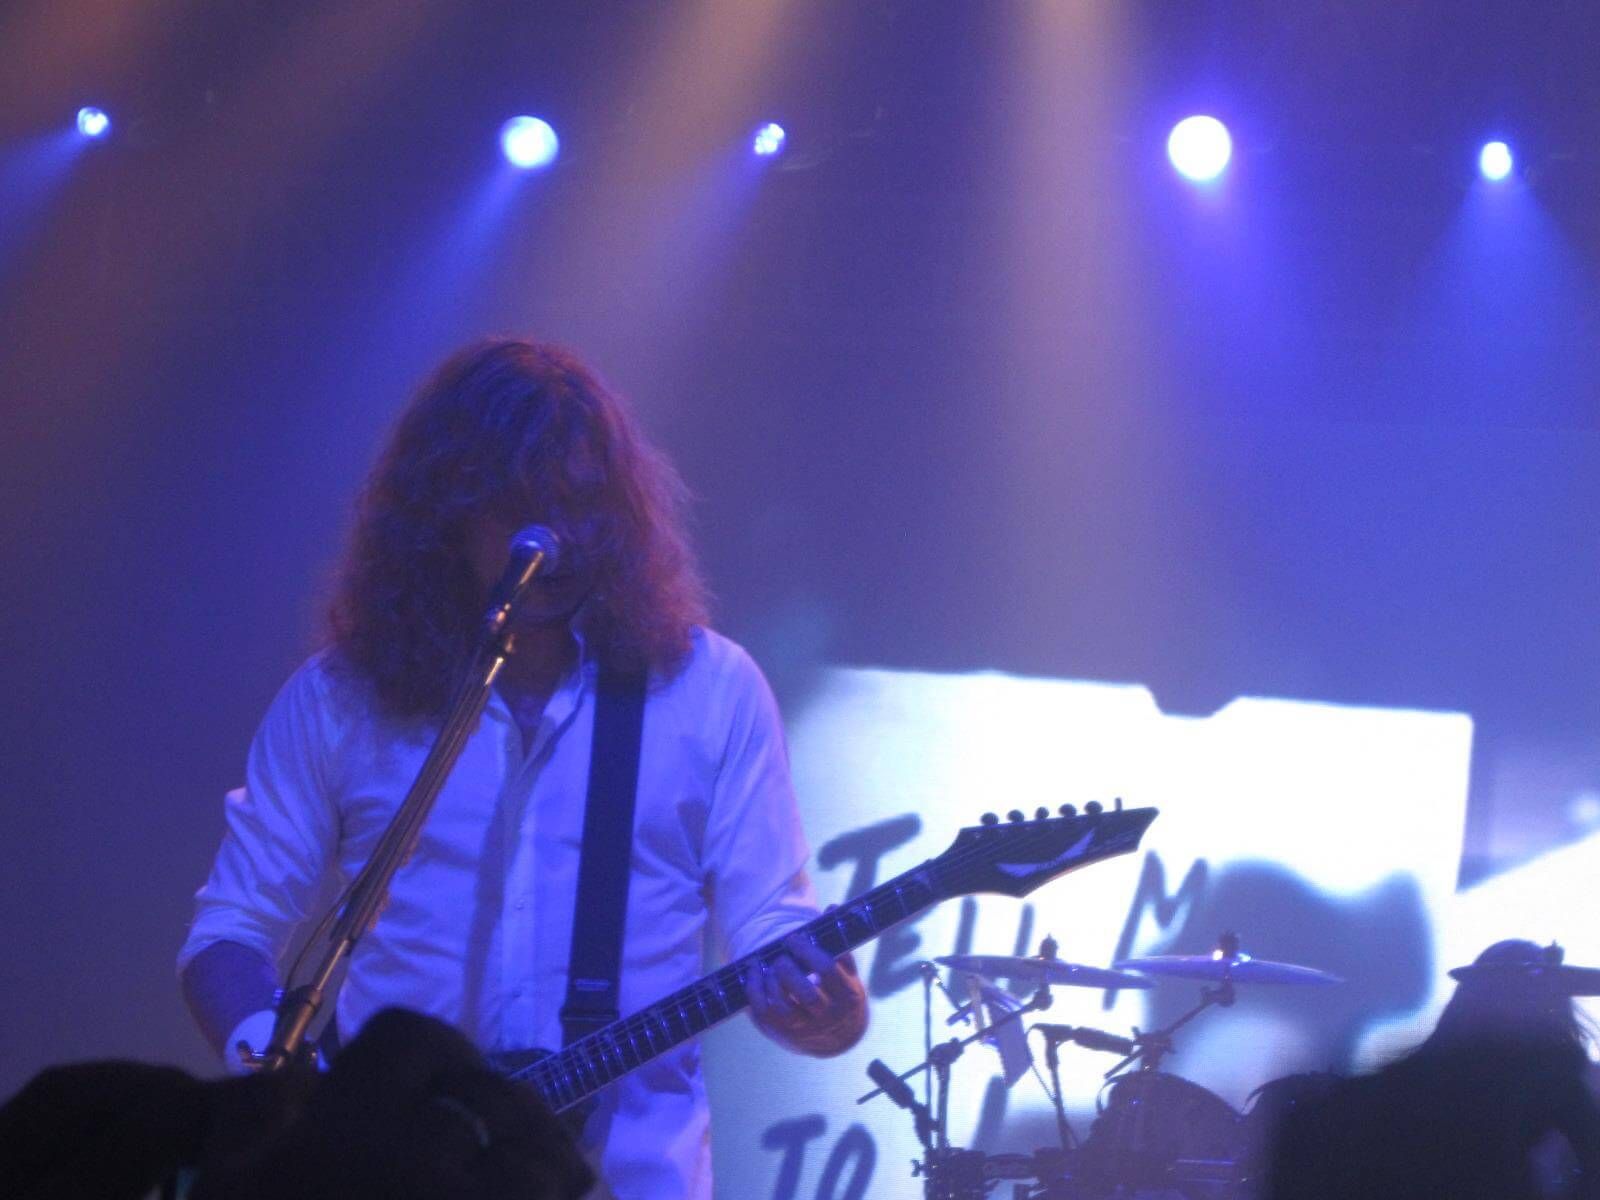 Dave Mustaine, Vocalist of Megadeth